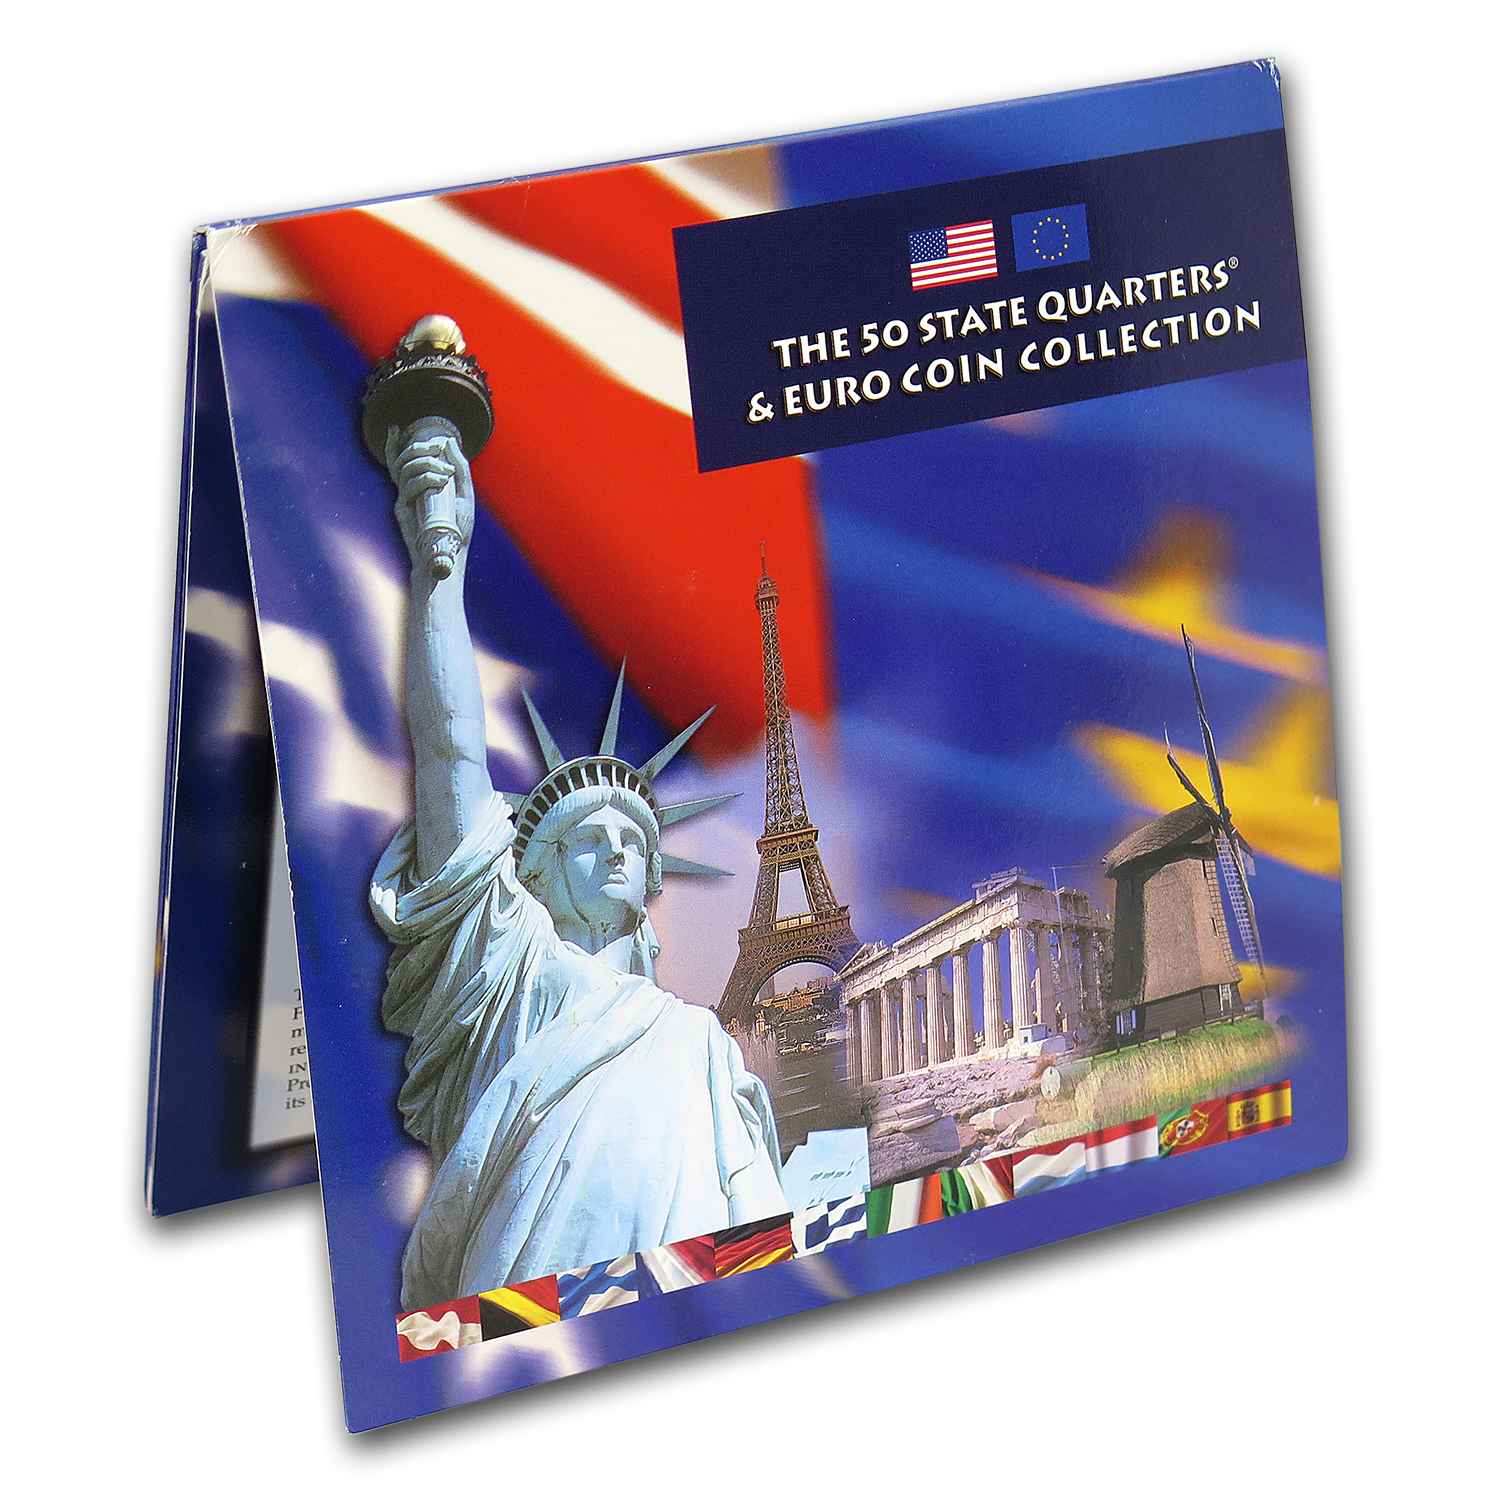 Buy The 50 State Quarters & Euro Coin Collection